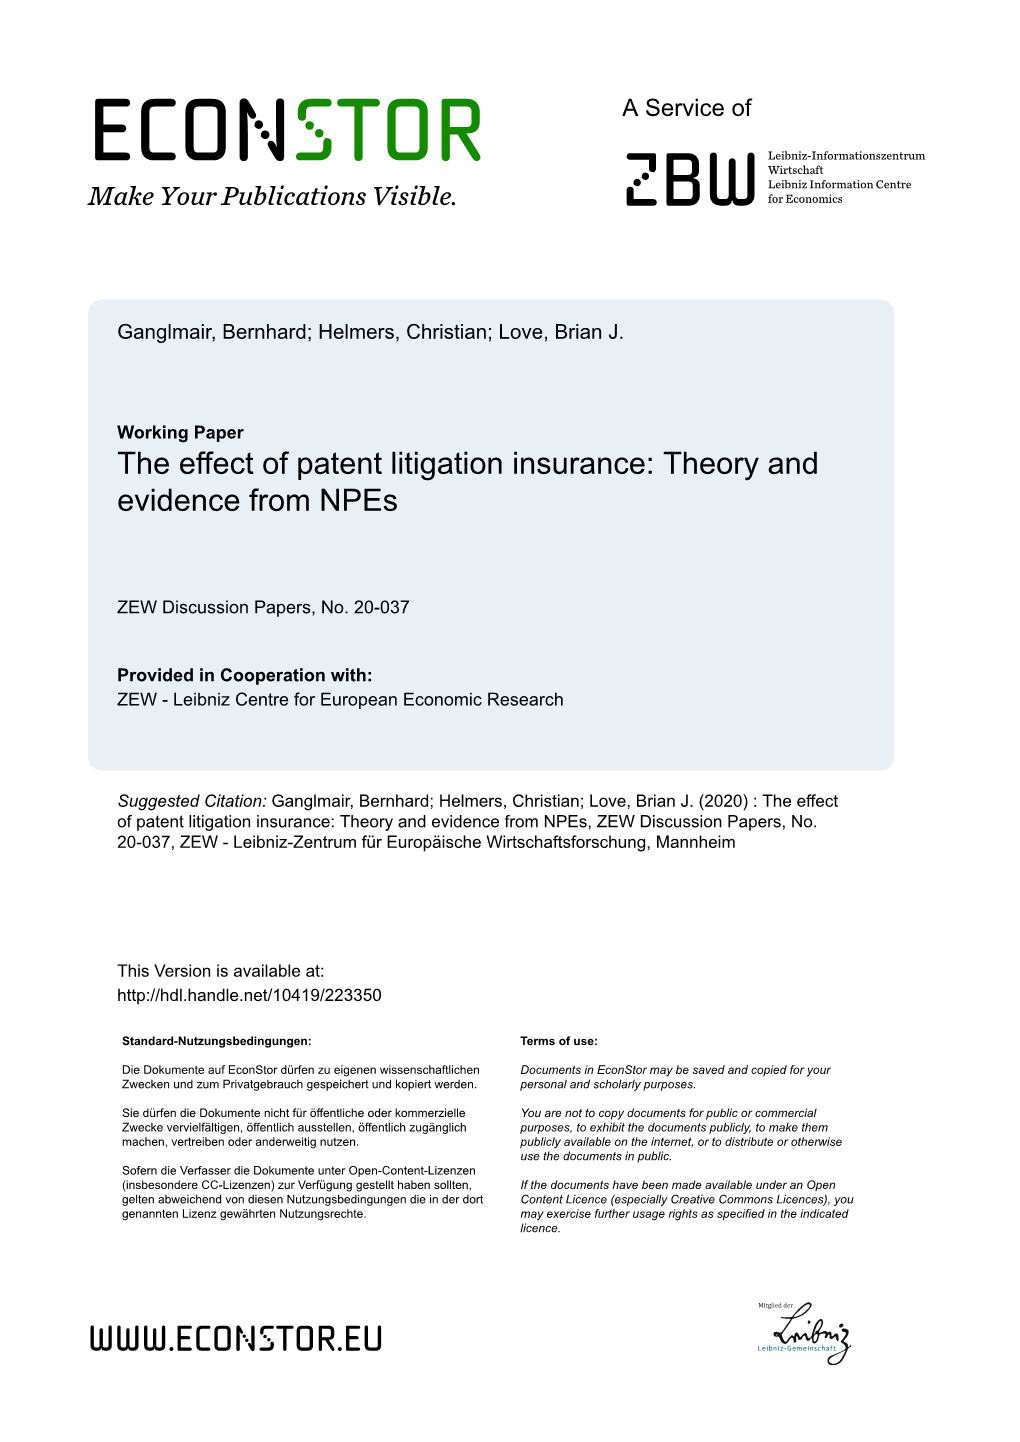 The Effect of Patent Litigation Insurance: Theory and Evidence from Npes